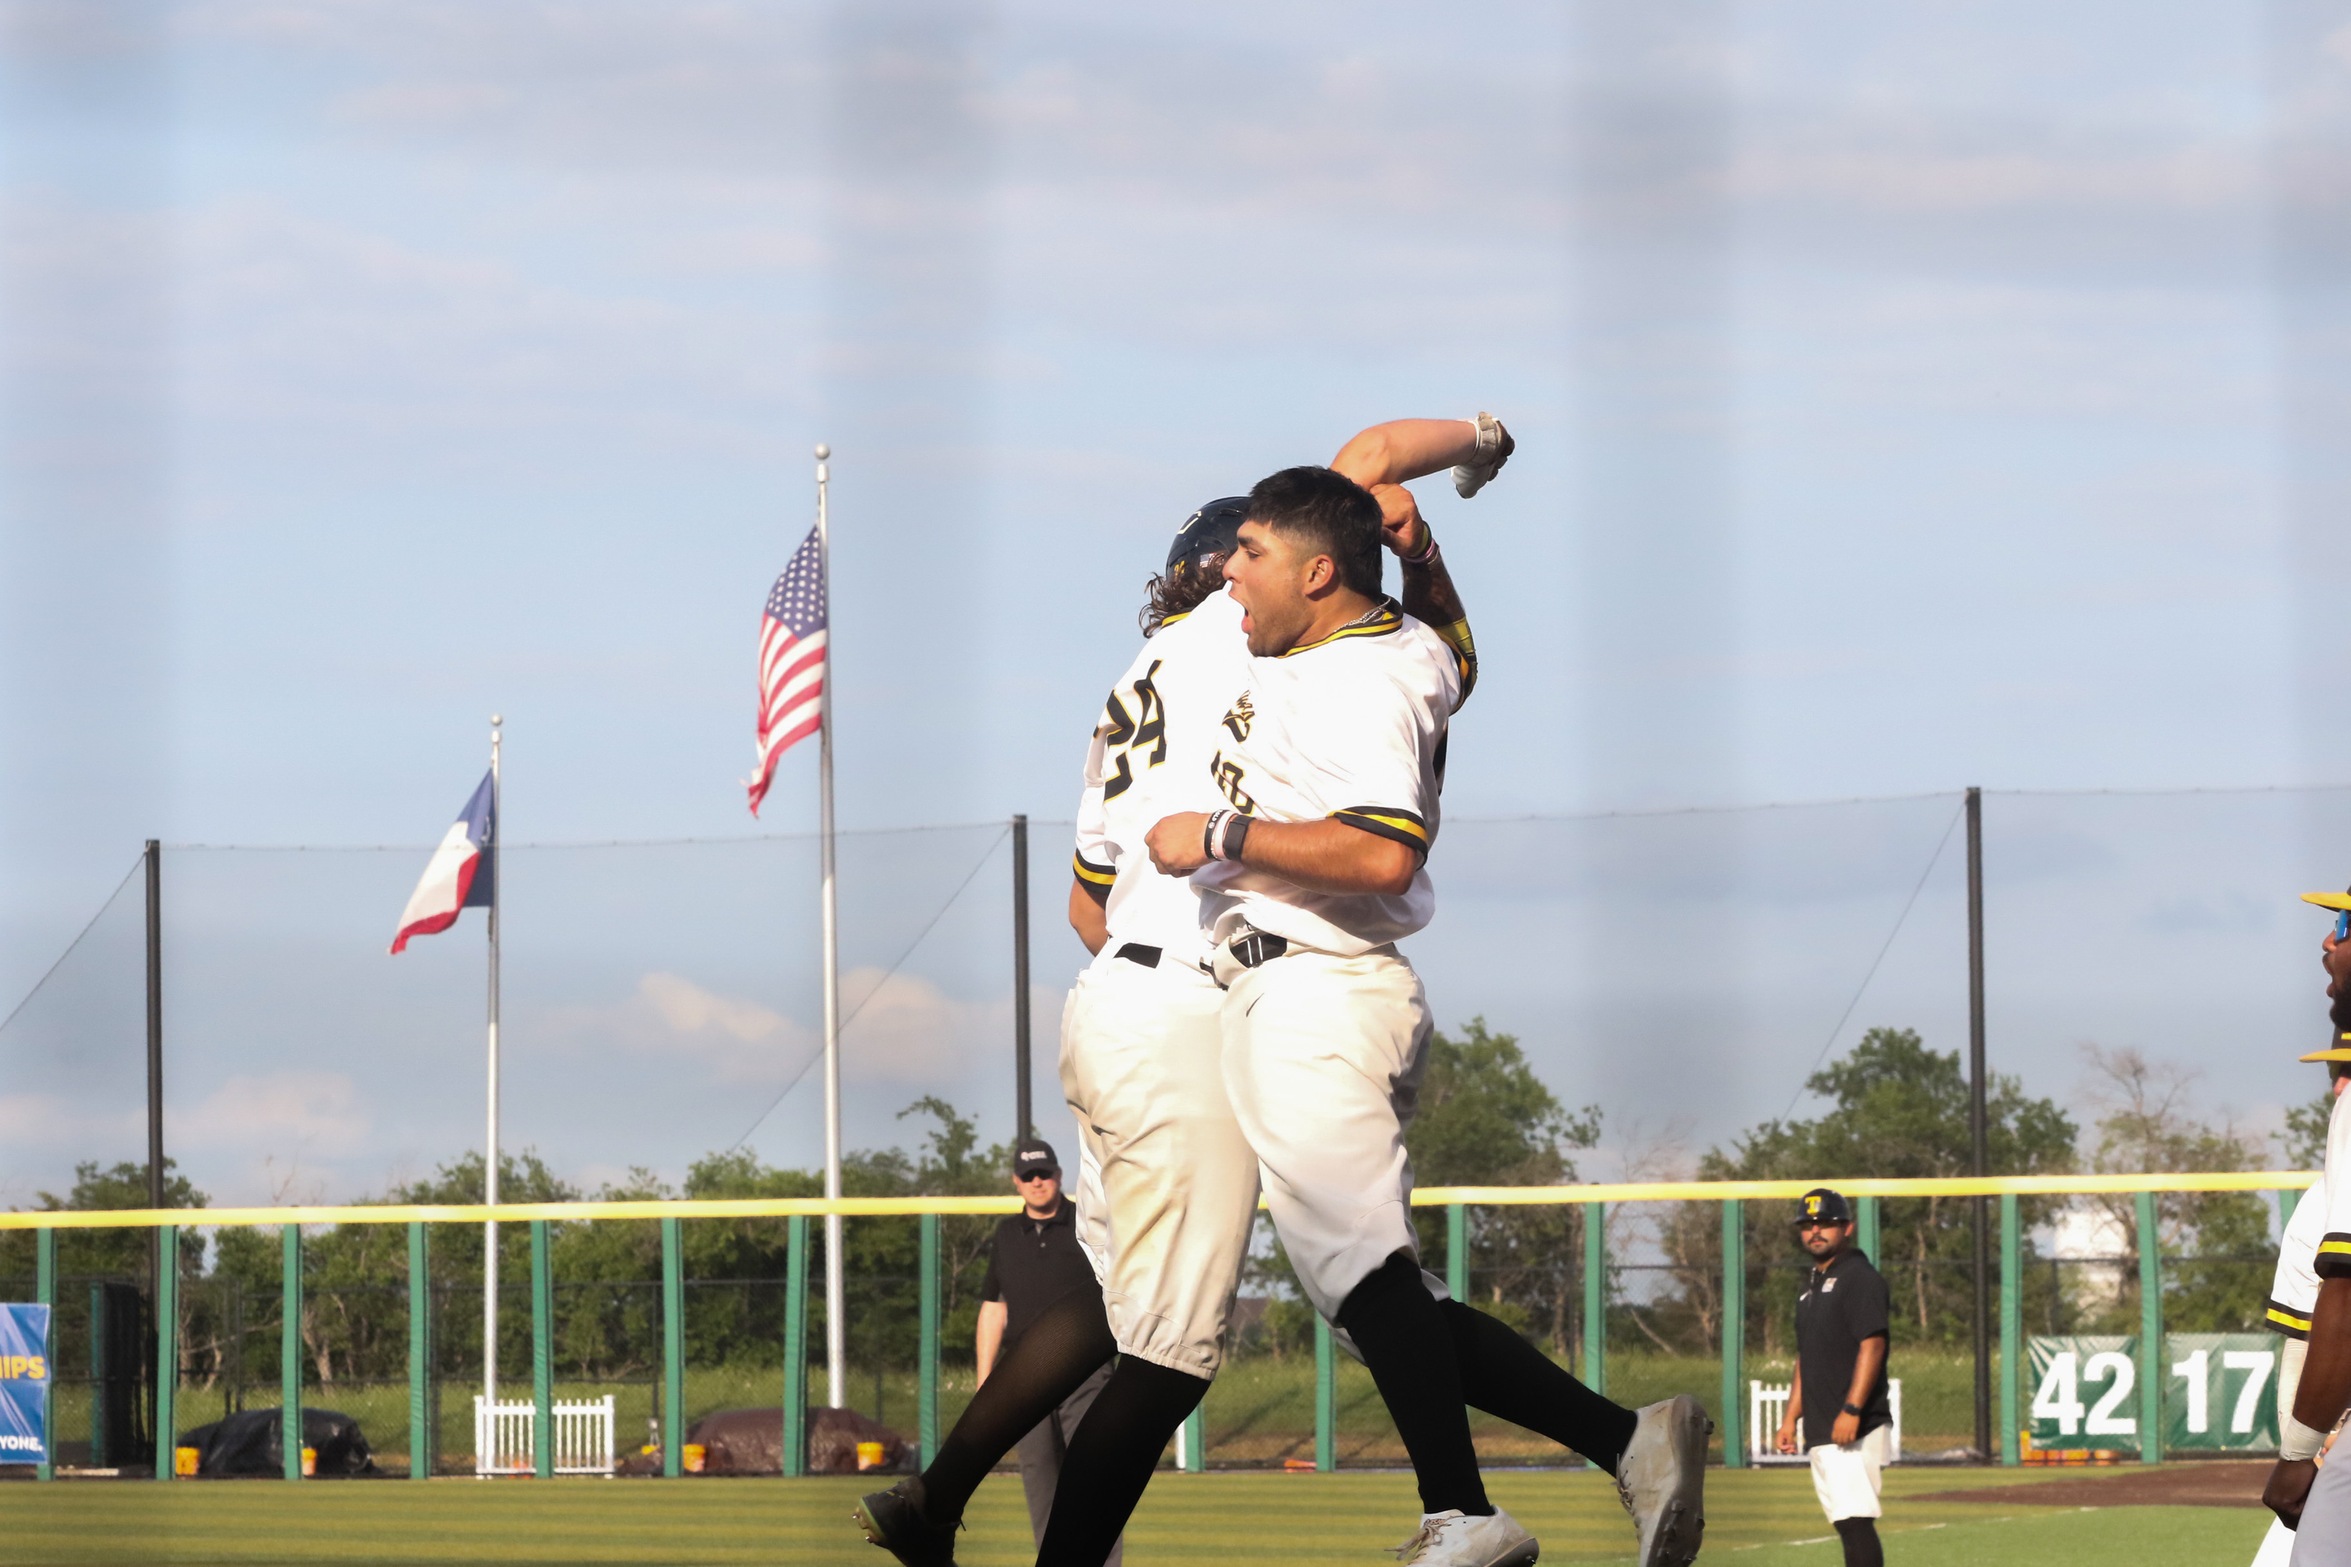 Adam Peavy and Xavier Arias celebrate after his home run (photo by Delvin Wilson, SCAC)